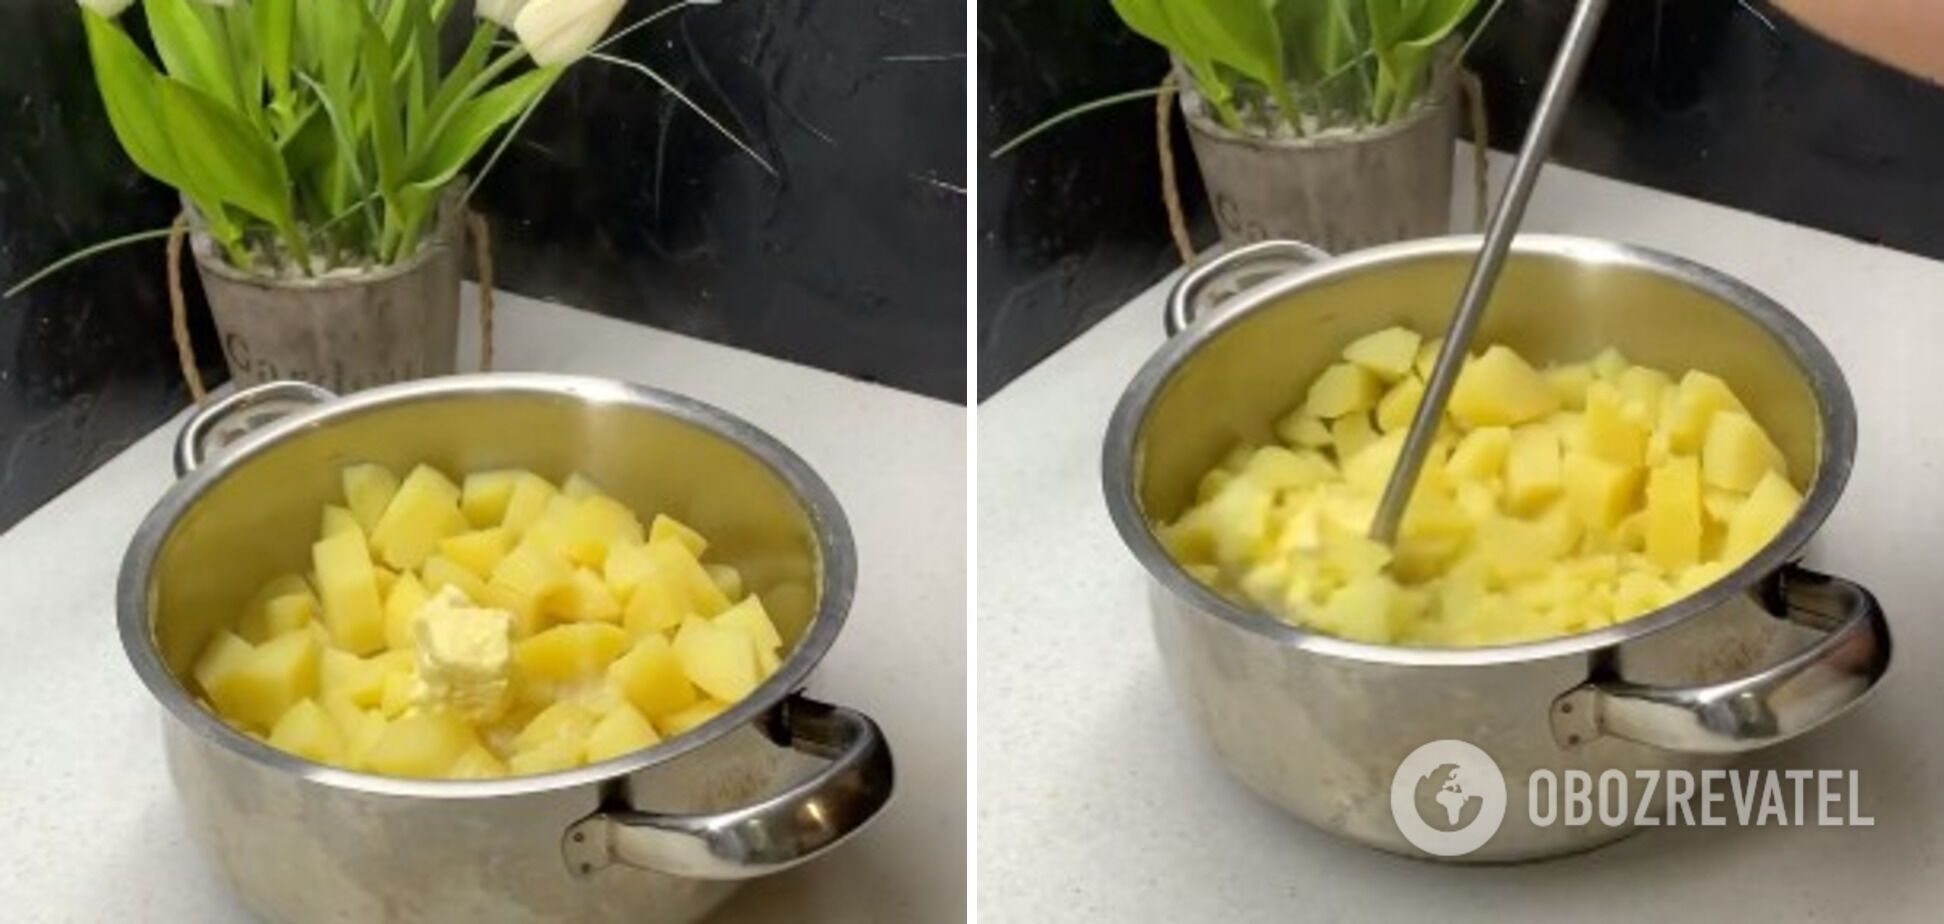 How to cook mashed potatoes properly so that they are lump-free